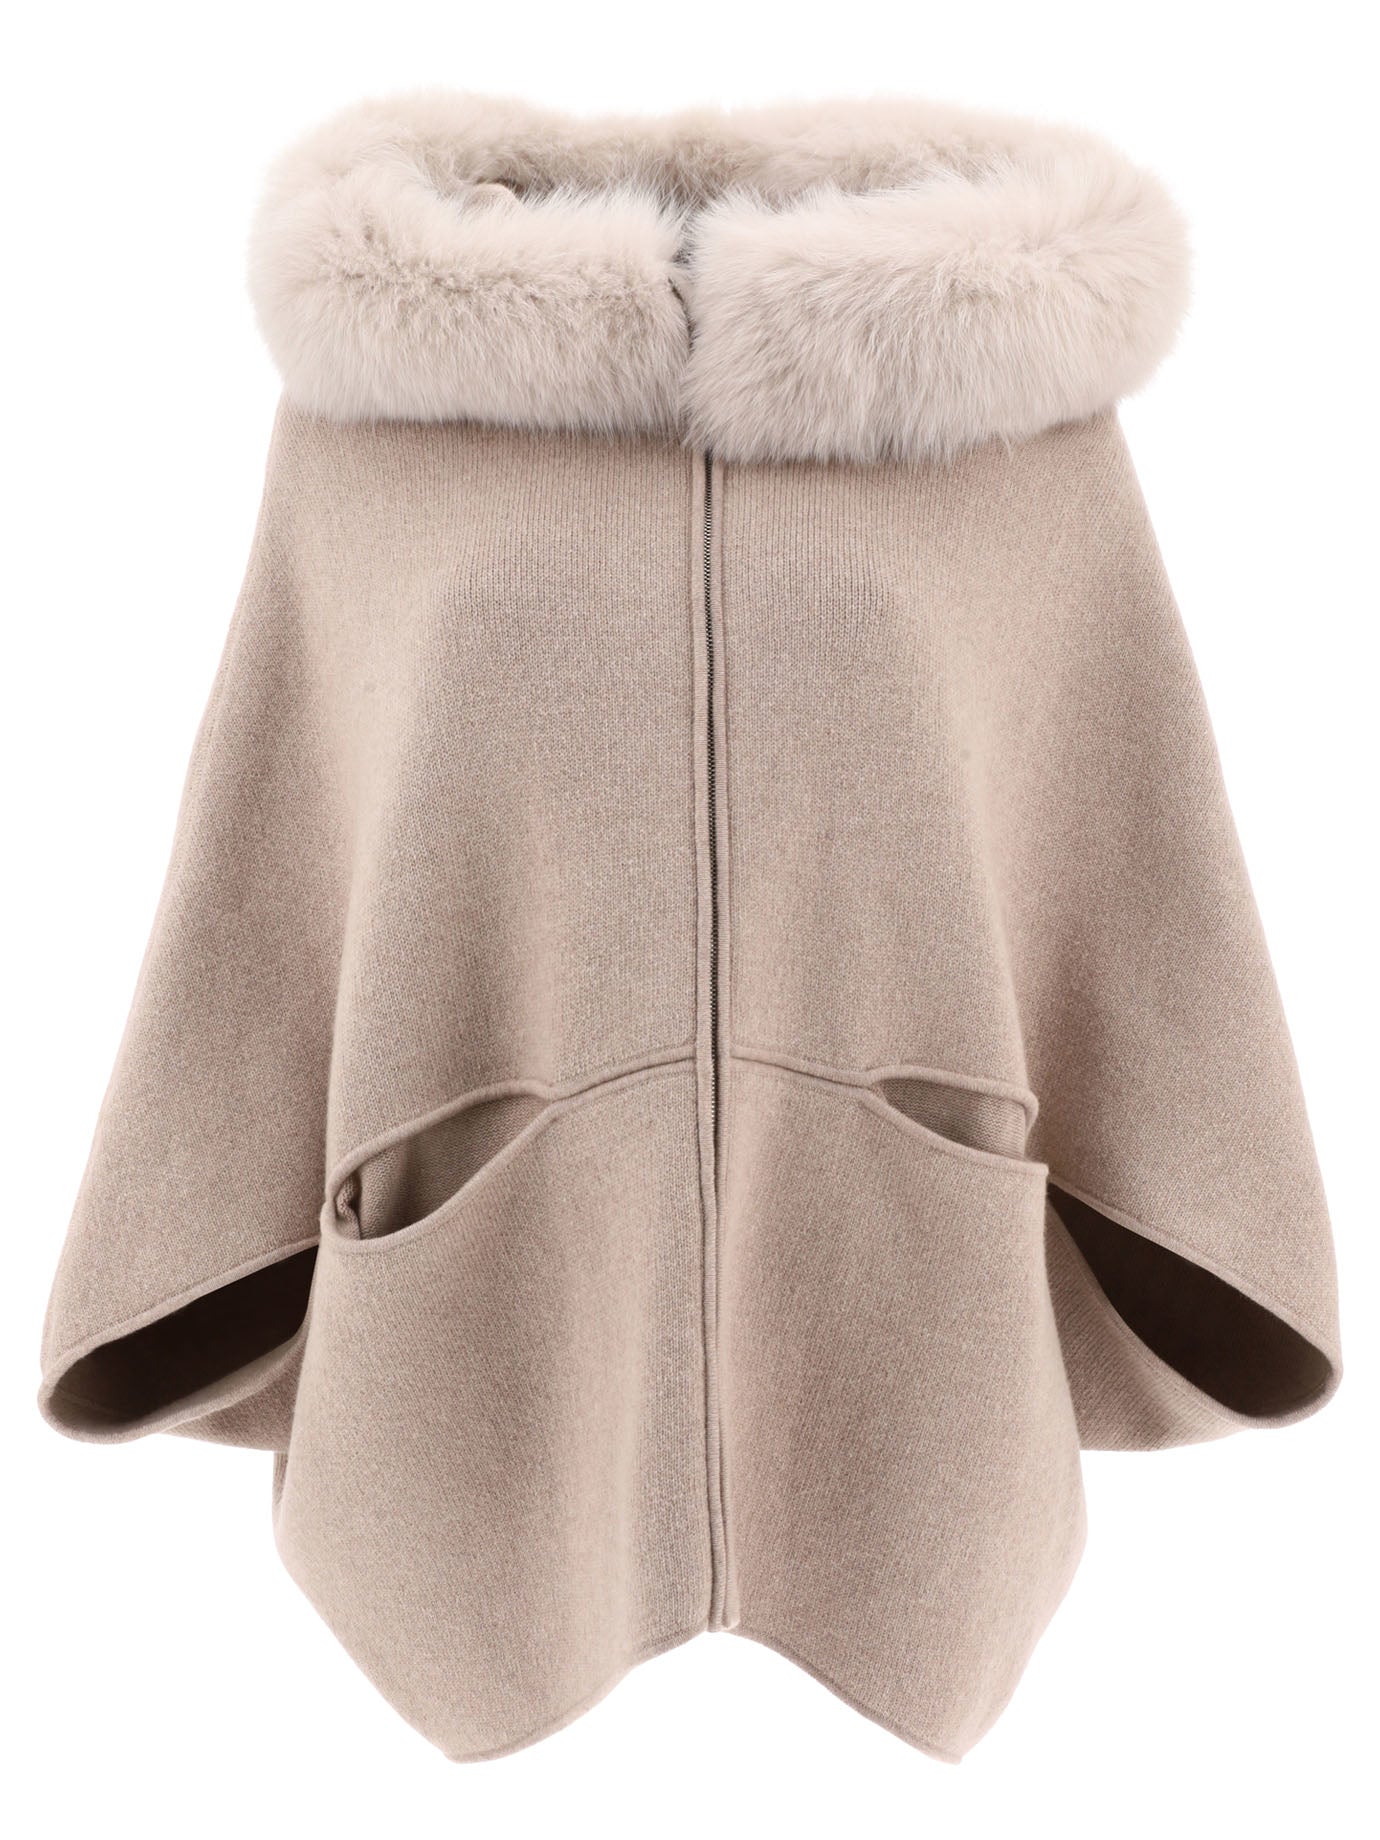 Shop Giovi Luxurious Beige Wool And Cashmere Cape For Women